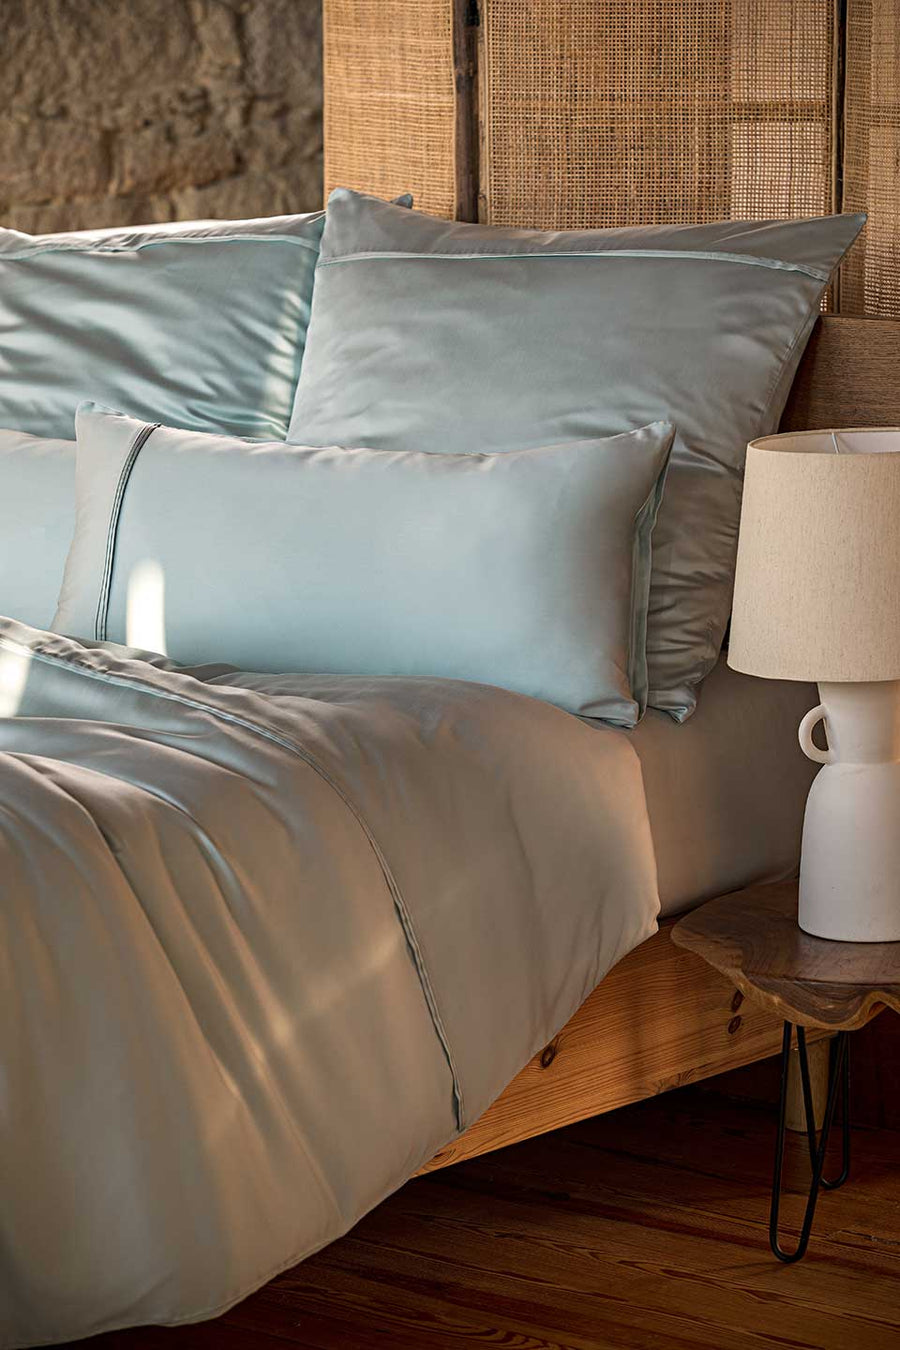 Bed with TENCEL™ Lyocell bedding next to an rustic bedside table.